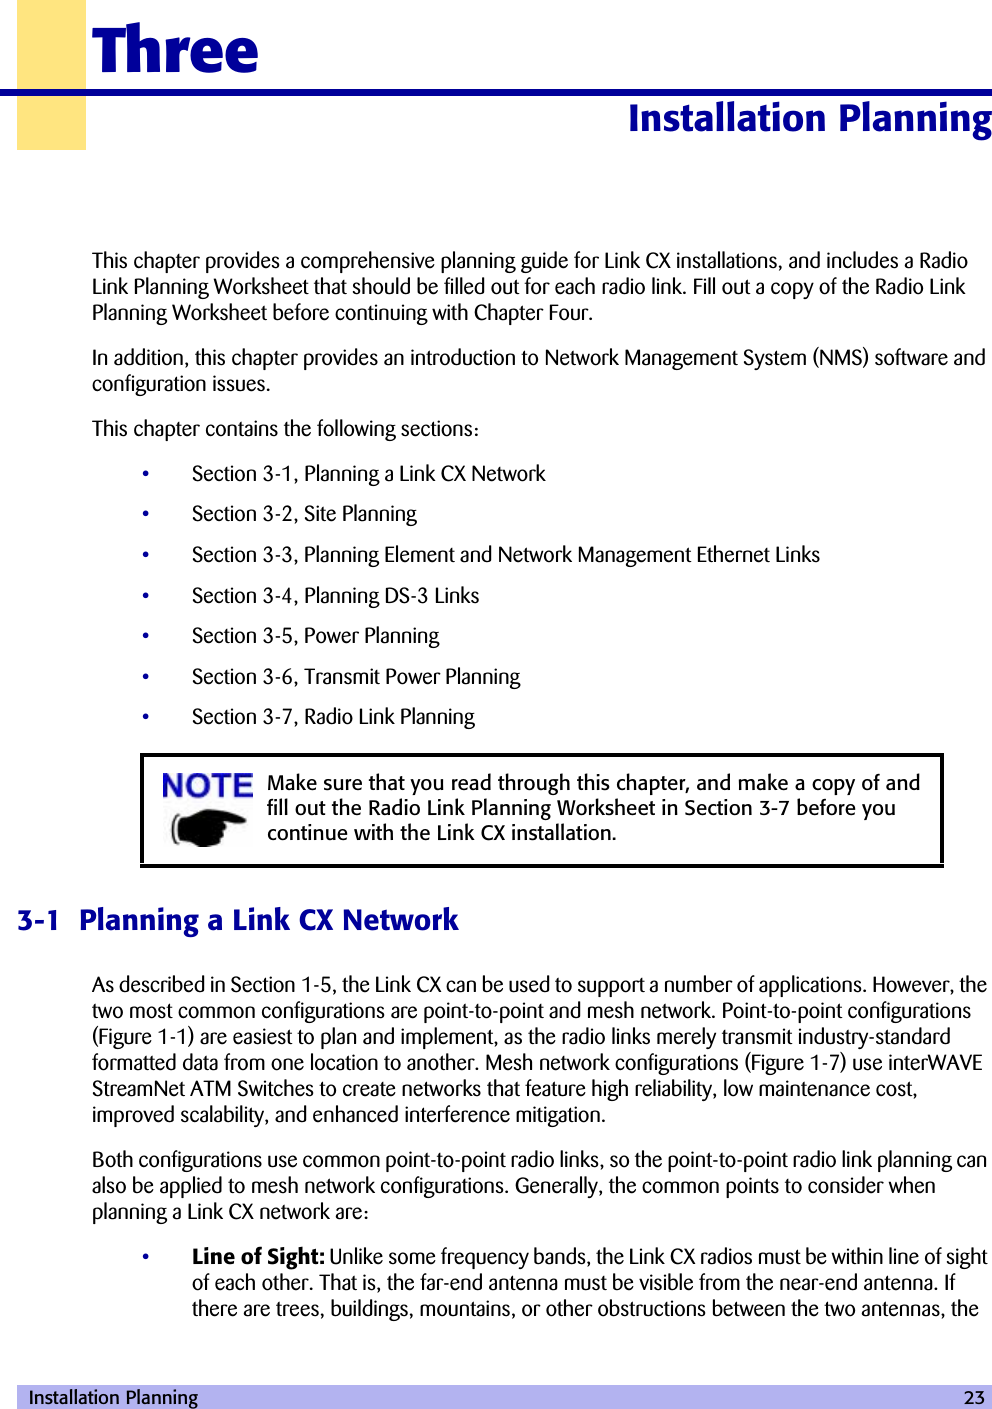  Installation Planning 23ThreeInstallation Planning 30000This chapter provides a comprehensive planning guide for Link CX installations, and includes a Radio Link Planning Worksheet that should be filled out for each radio link. Fill out a copy of the Radio Link Planning Worksheet before continuing with Chapter Four.In addition, this chapter provides an introduction to Network Management System (NMS) software and configuration issues.This chapter contains the following sections:•Section 3-1, Planning a Link CX Network•Section 3-2, Site Planning•Section 3-3, Planning Element and Network Management Ethernet Links•Section 3-4, Planning DS-3 Links•Section 3-5, Power Planning•Section 3-6, Transmit Power Planning•Section 3-7, Radio Link Planning3-1  Planning a Link CX NetworkAs described in Section 1-5, the Link CX can be used to support a number of applications. However, the two most common configurations are point-to-point and mesh network. Point-to-point configurations (Figure 1-1) are easiest to plan and implement, as the radio links merely transmit industry-standard formatted data from one location to another. Mesh network configurations (Figure 1-7) use interWAVE StreamNet ATM Switches to create networks that feature high reliability, low maintenance cost, improved scalability, and enhanced interference mitigation.Both configurations use common point-to-point radio links, so the point-to-point radio link planning can also be applied to mesh network configurations. Generally, the common points to consider when planning a Link CX network are:•Line of Sight: Unlike some frequency bands, the Link CX radios must be within line of sight of each other. That is, the far-end antenna must be visible from the near-end antenna. If there are trees, buildings, mountains, or other obstructions between the two antennas, the Make sure that you read through this chapter, and make a copy of and fill out the Radio Link Planning Worksheet in Section 3-7 before you continue with the Link CX installation.